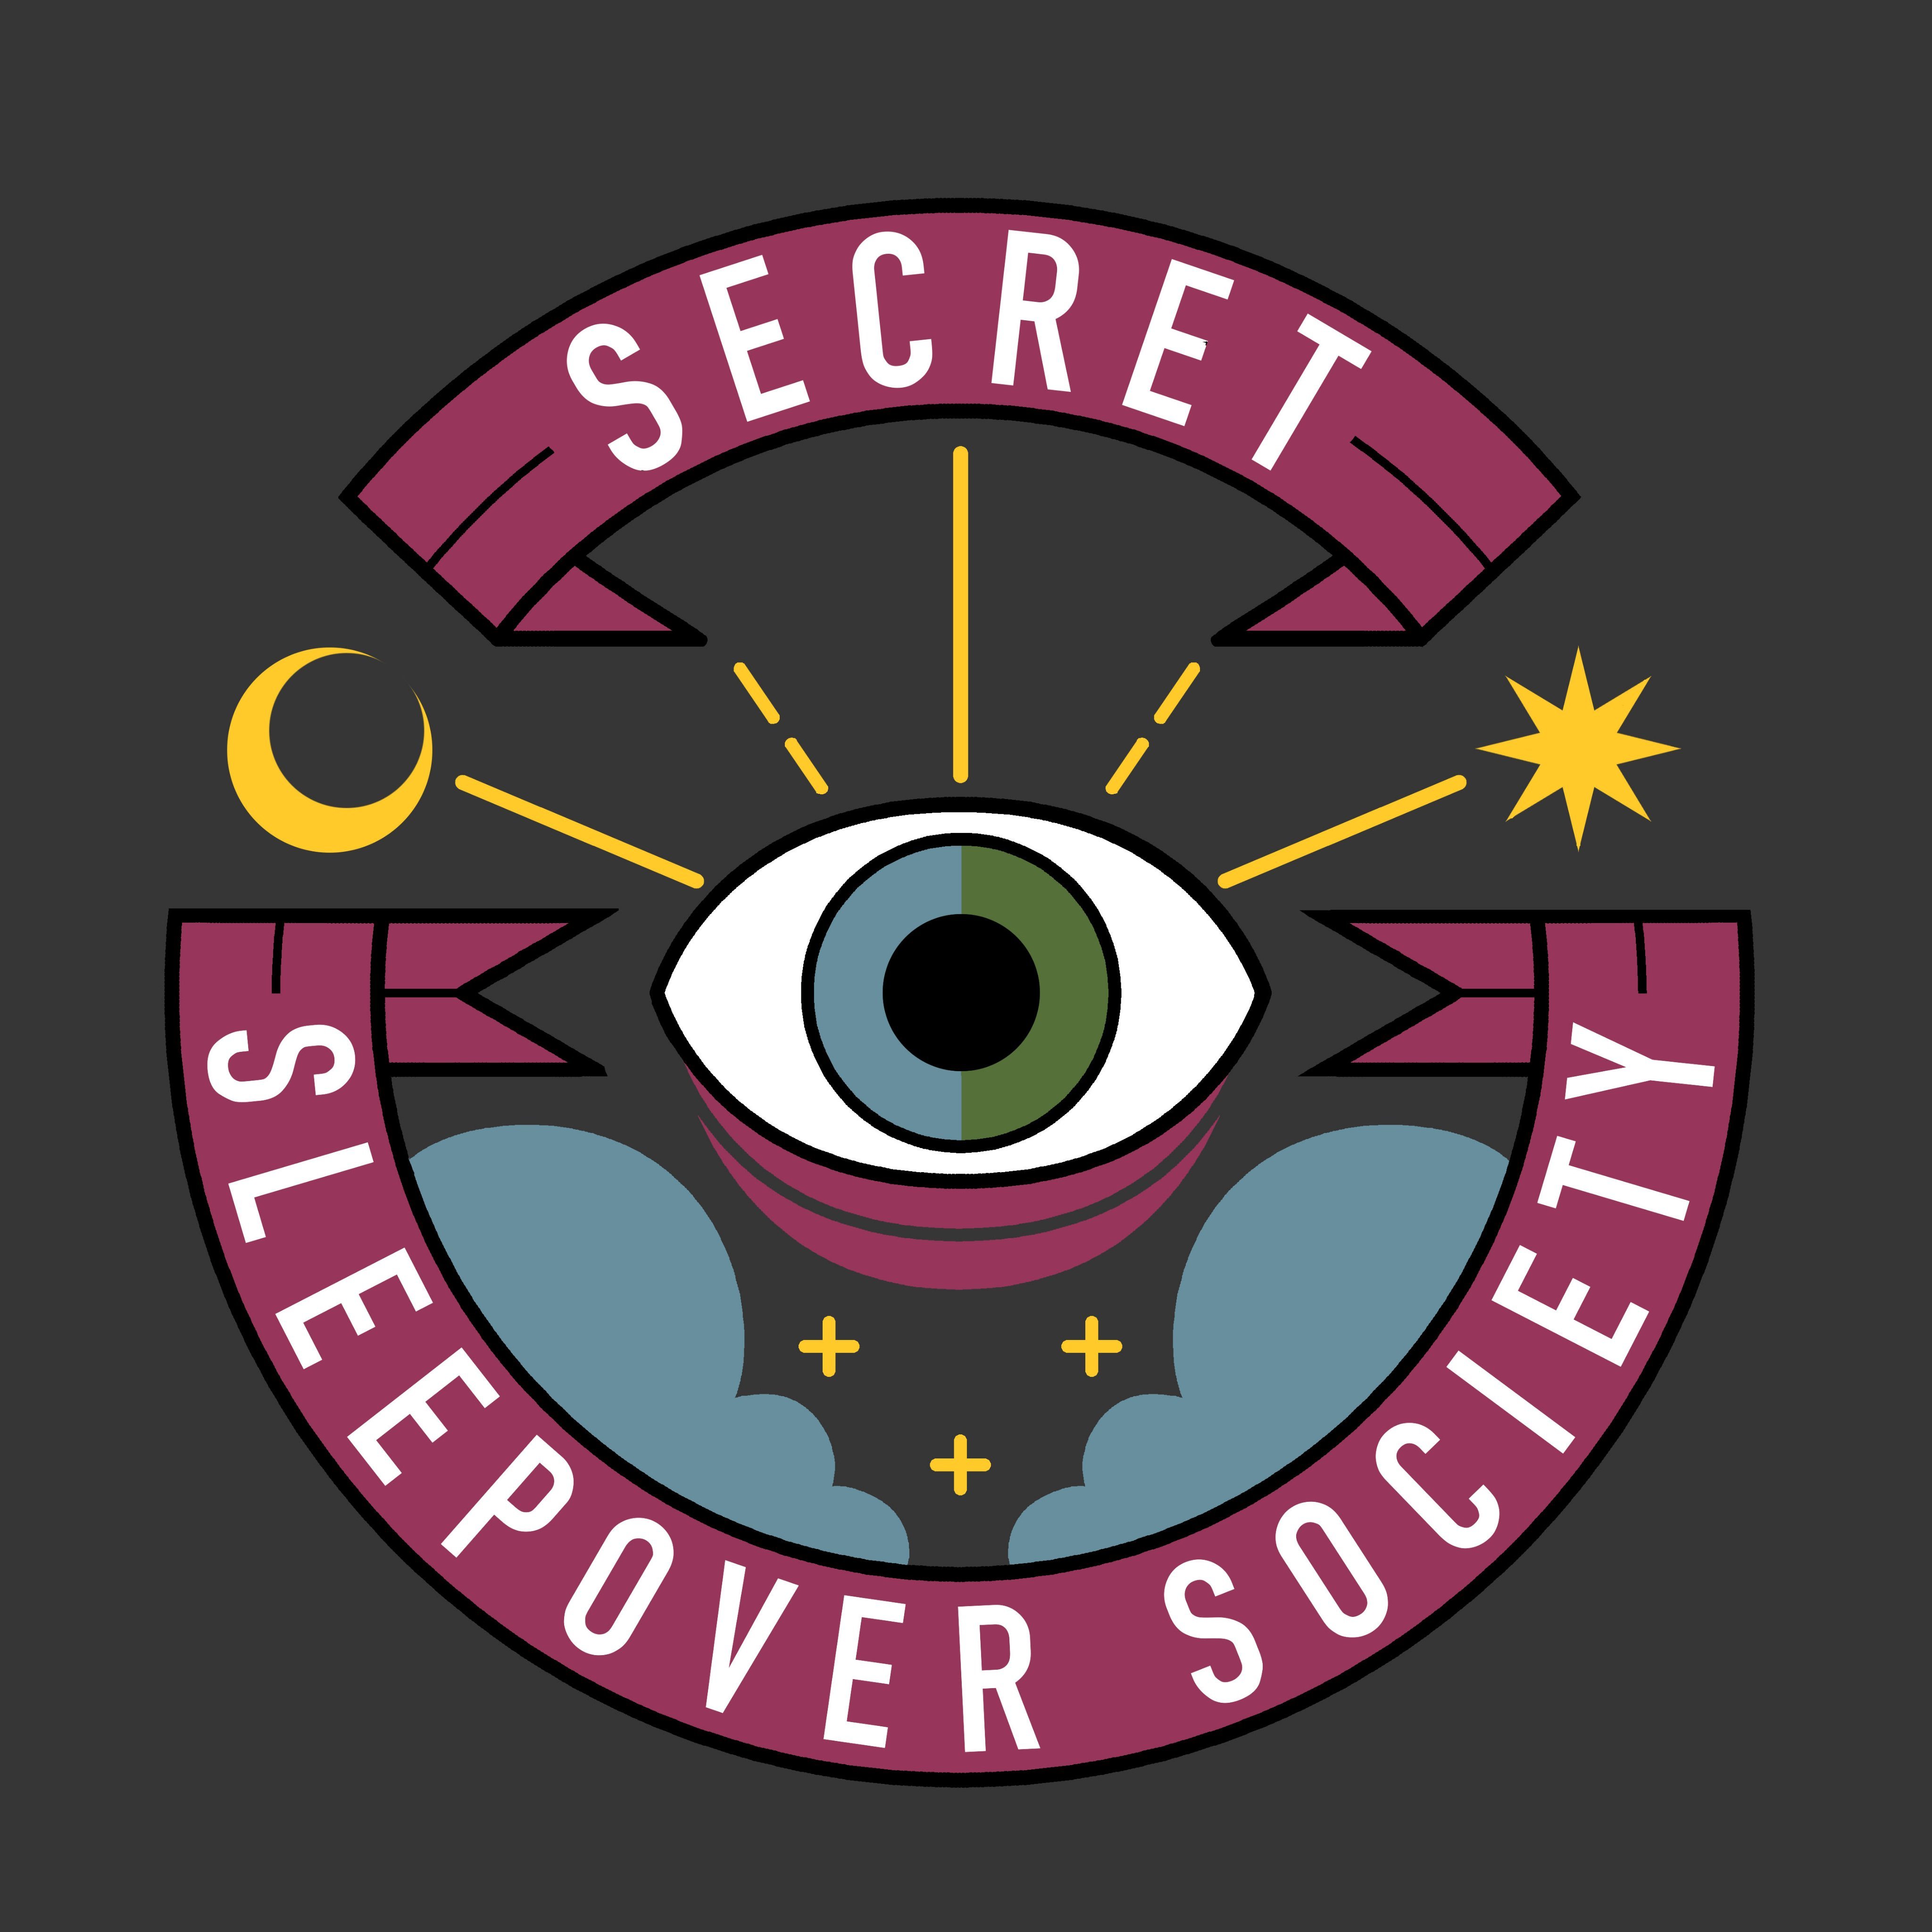 Official Twitter of SSS streams. @floabcomic and @julialepetit. secretsleepover.stream@gmail.com Streams Wednesday and Sunday at 9pm ET.  ❤🧡💛💚💙💜